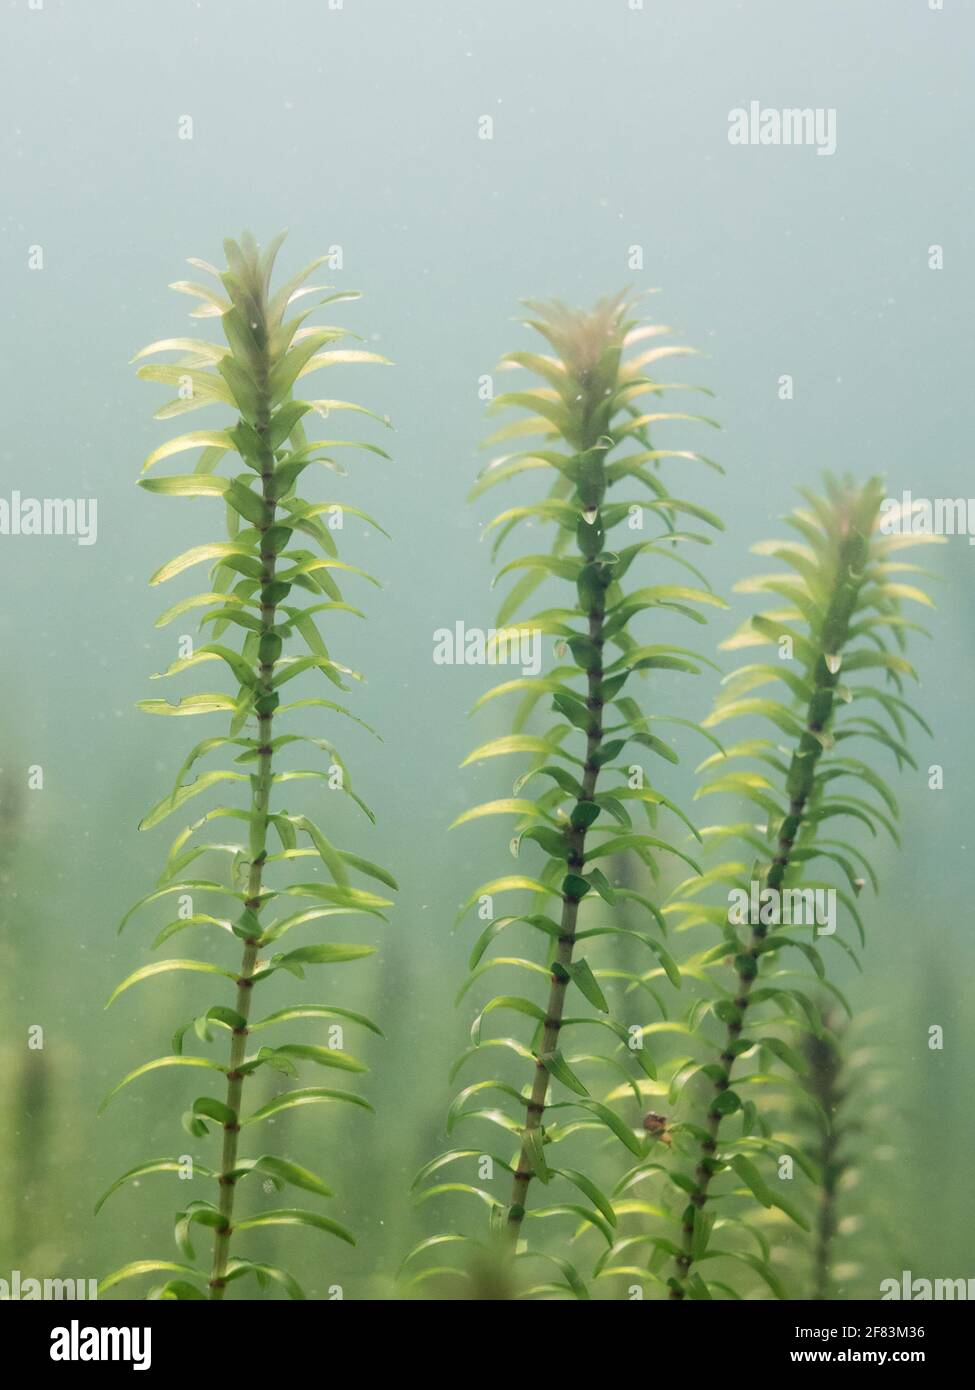 Close-up underwater view of Canadian waterweed sprouts Stock Photo